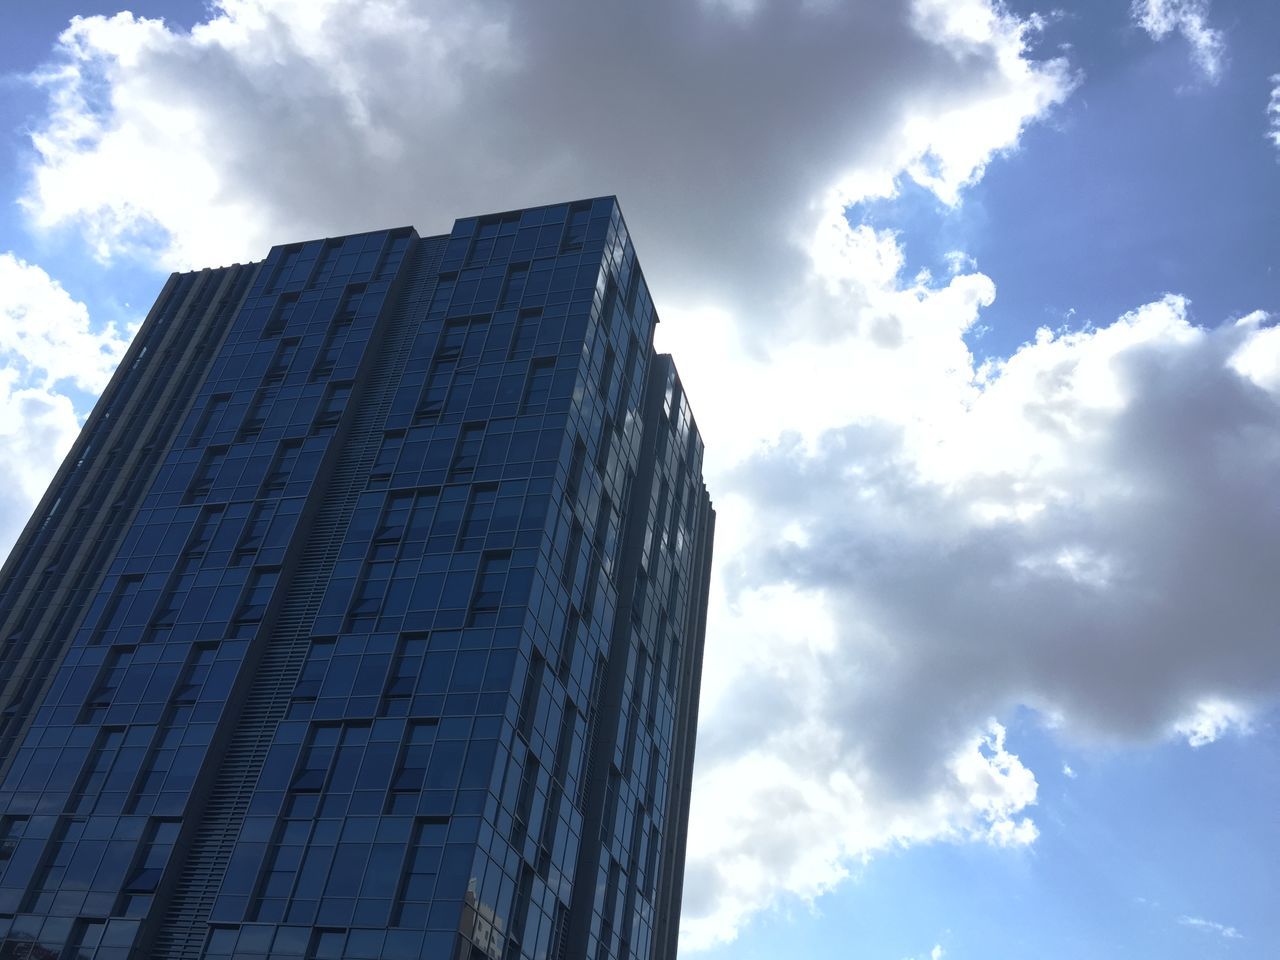 low angle view, sky, building exterior, architecture, built structure, cloud - sky, cloud, cloudy, building, day, outdoors, no people, city, blue, sunlight, tall - high, window, modern, pattern, high section